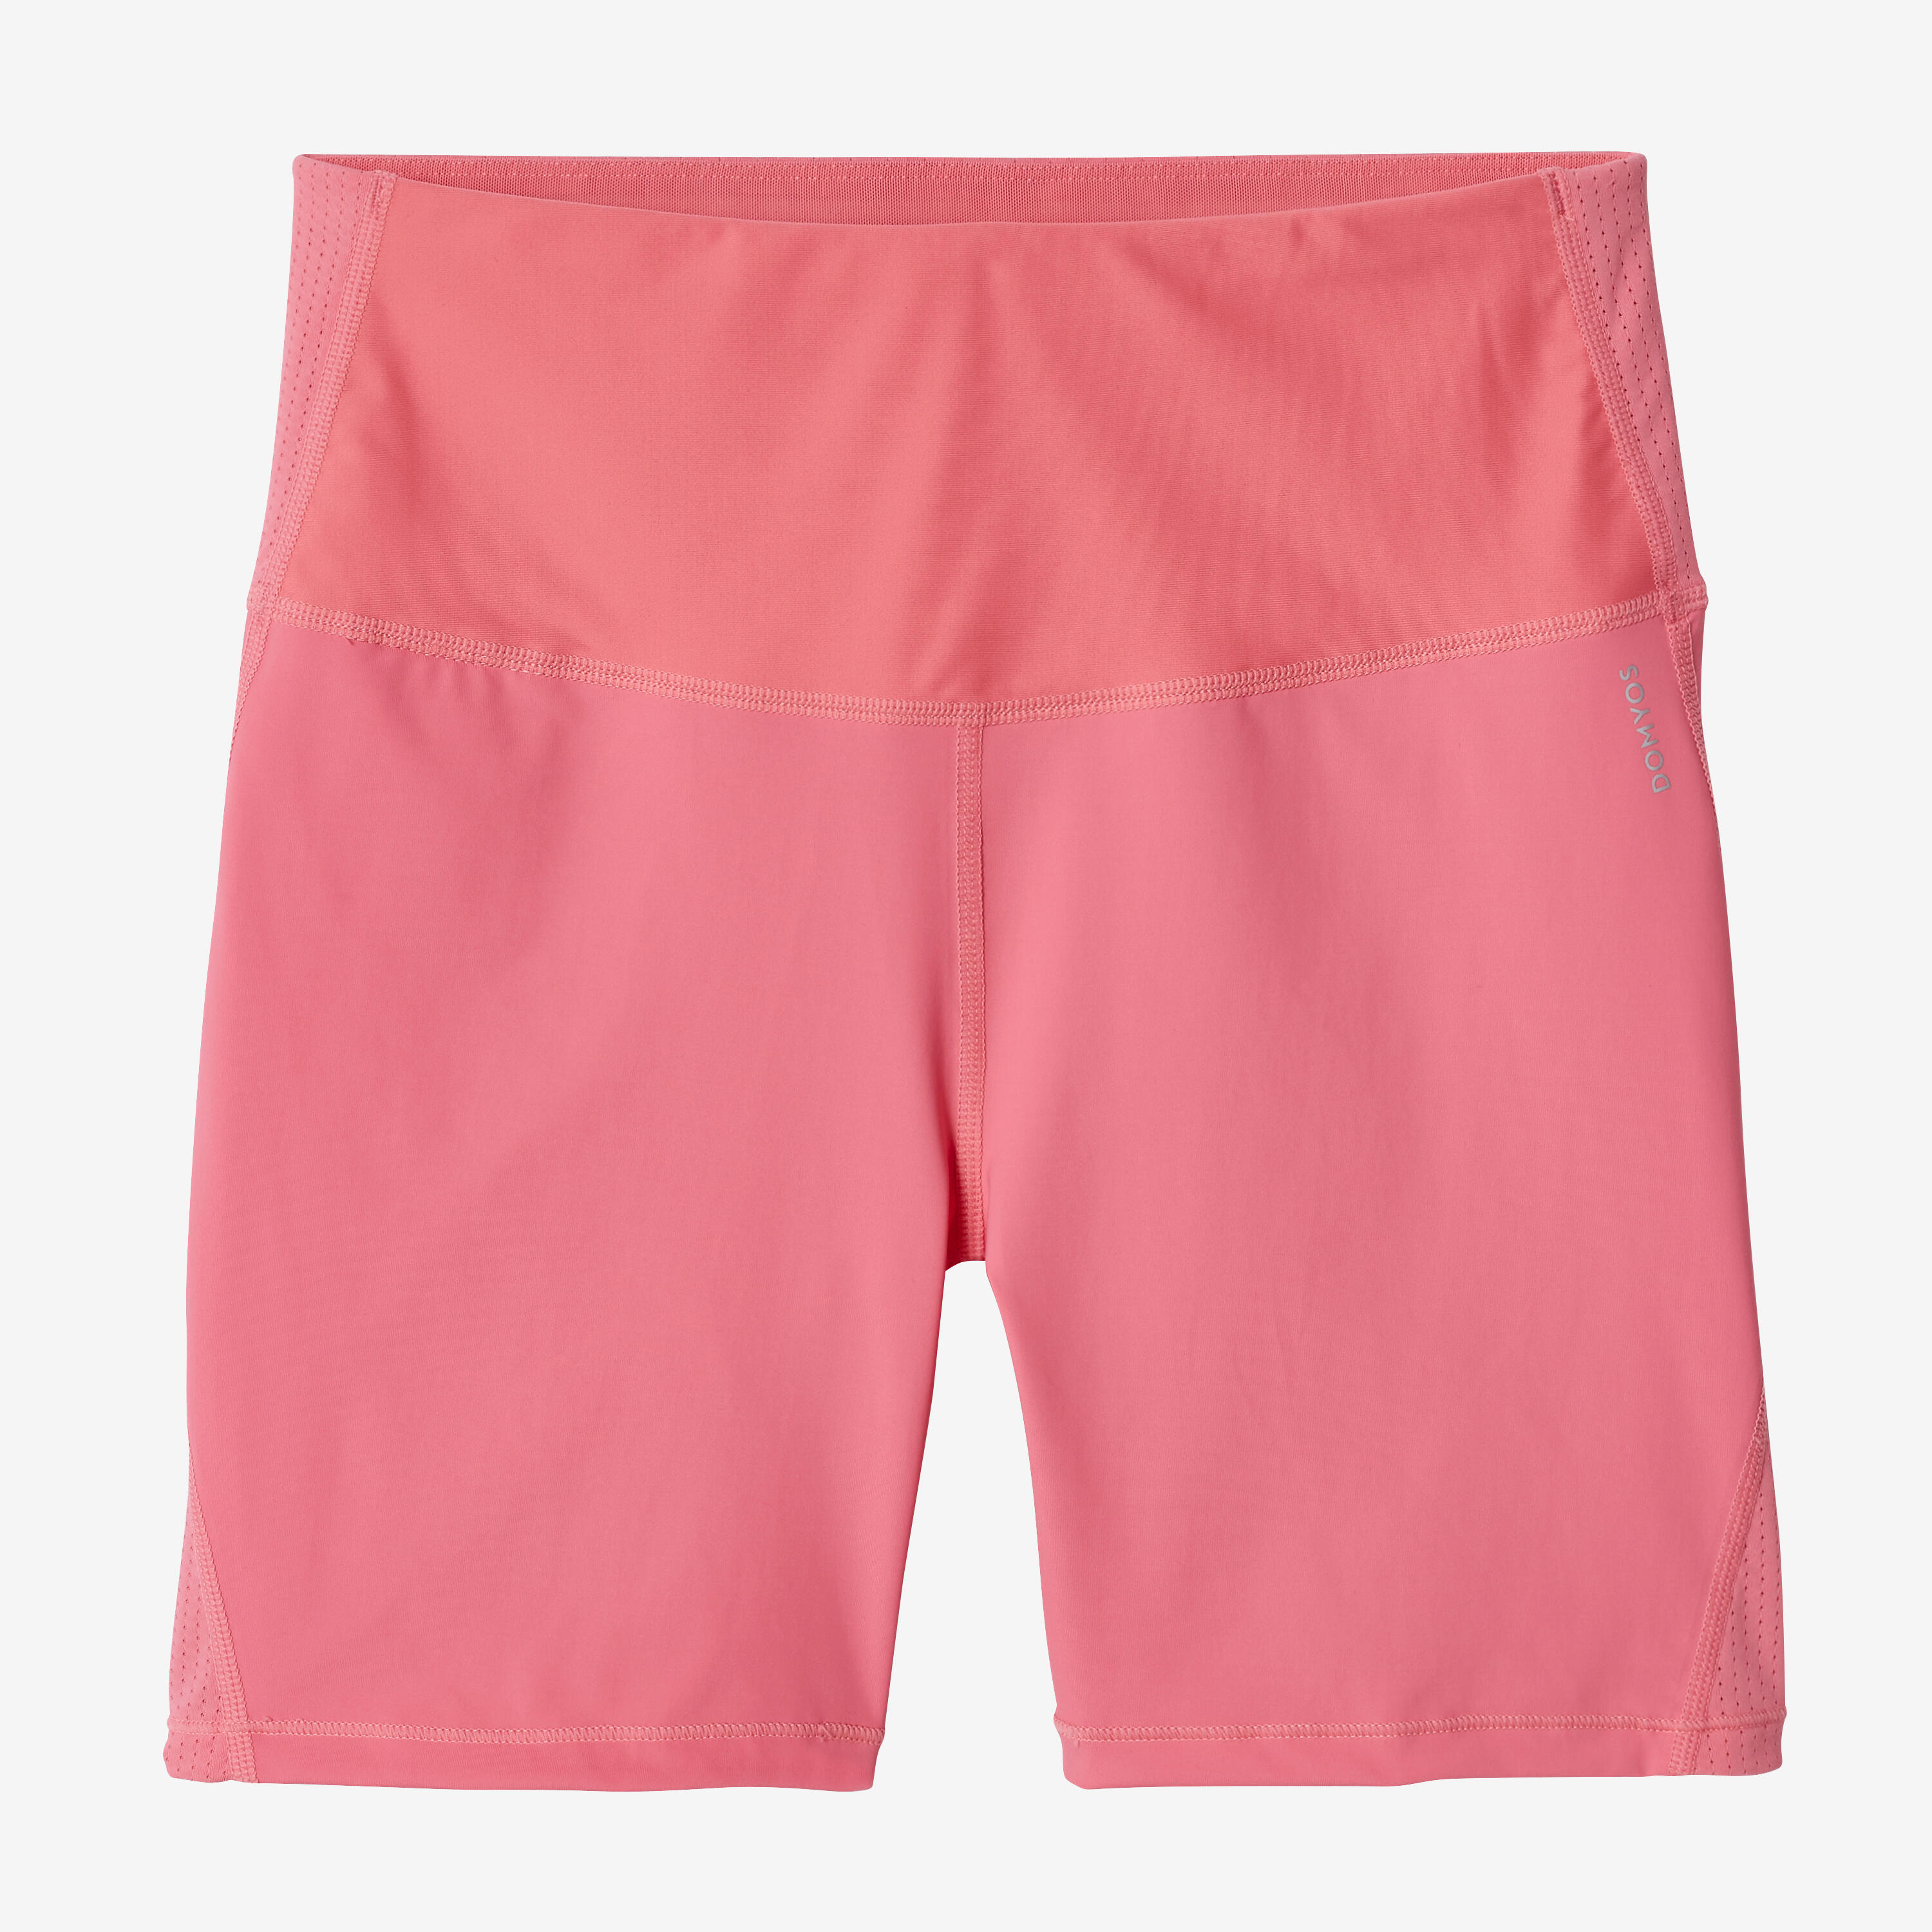 Women's Cardio Fitness High-Waisted Shaping Shorts - Pink 8/11